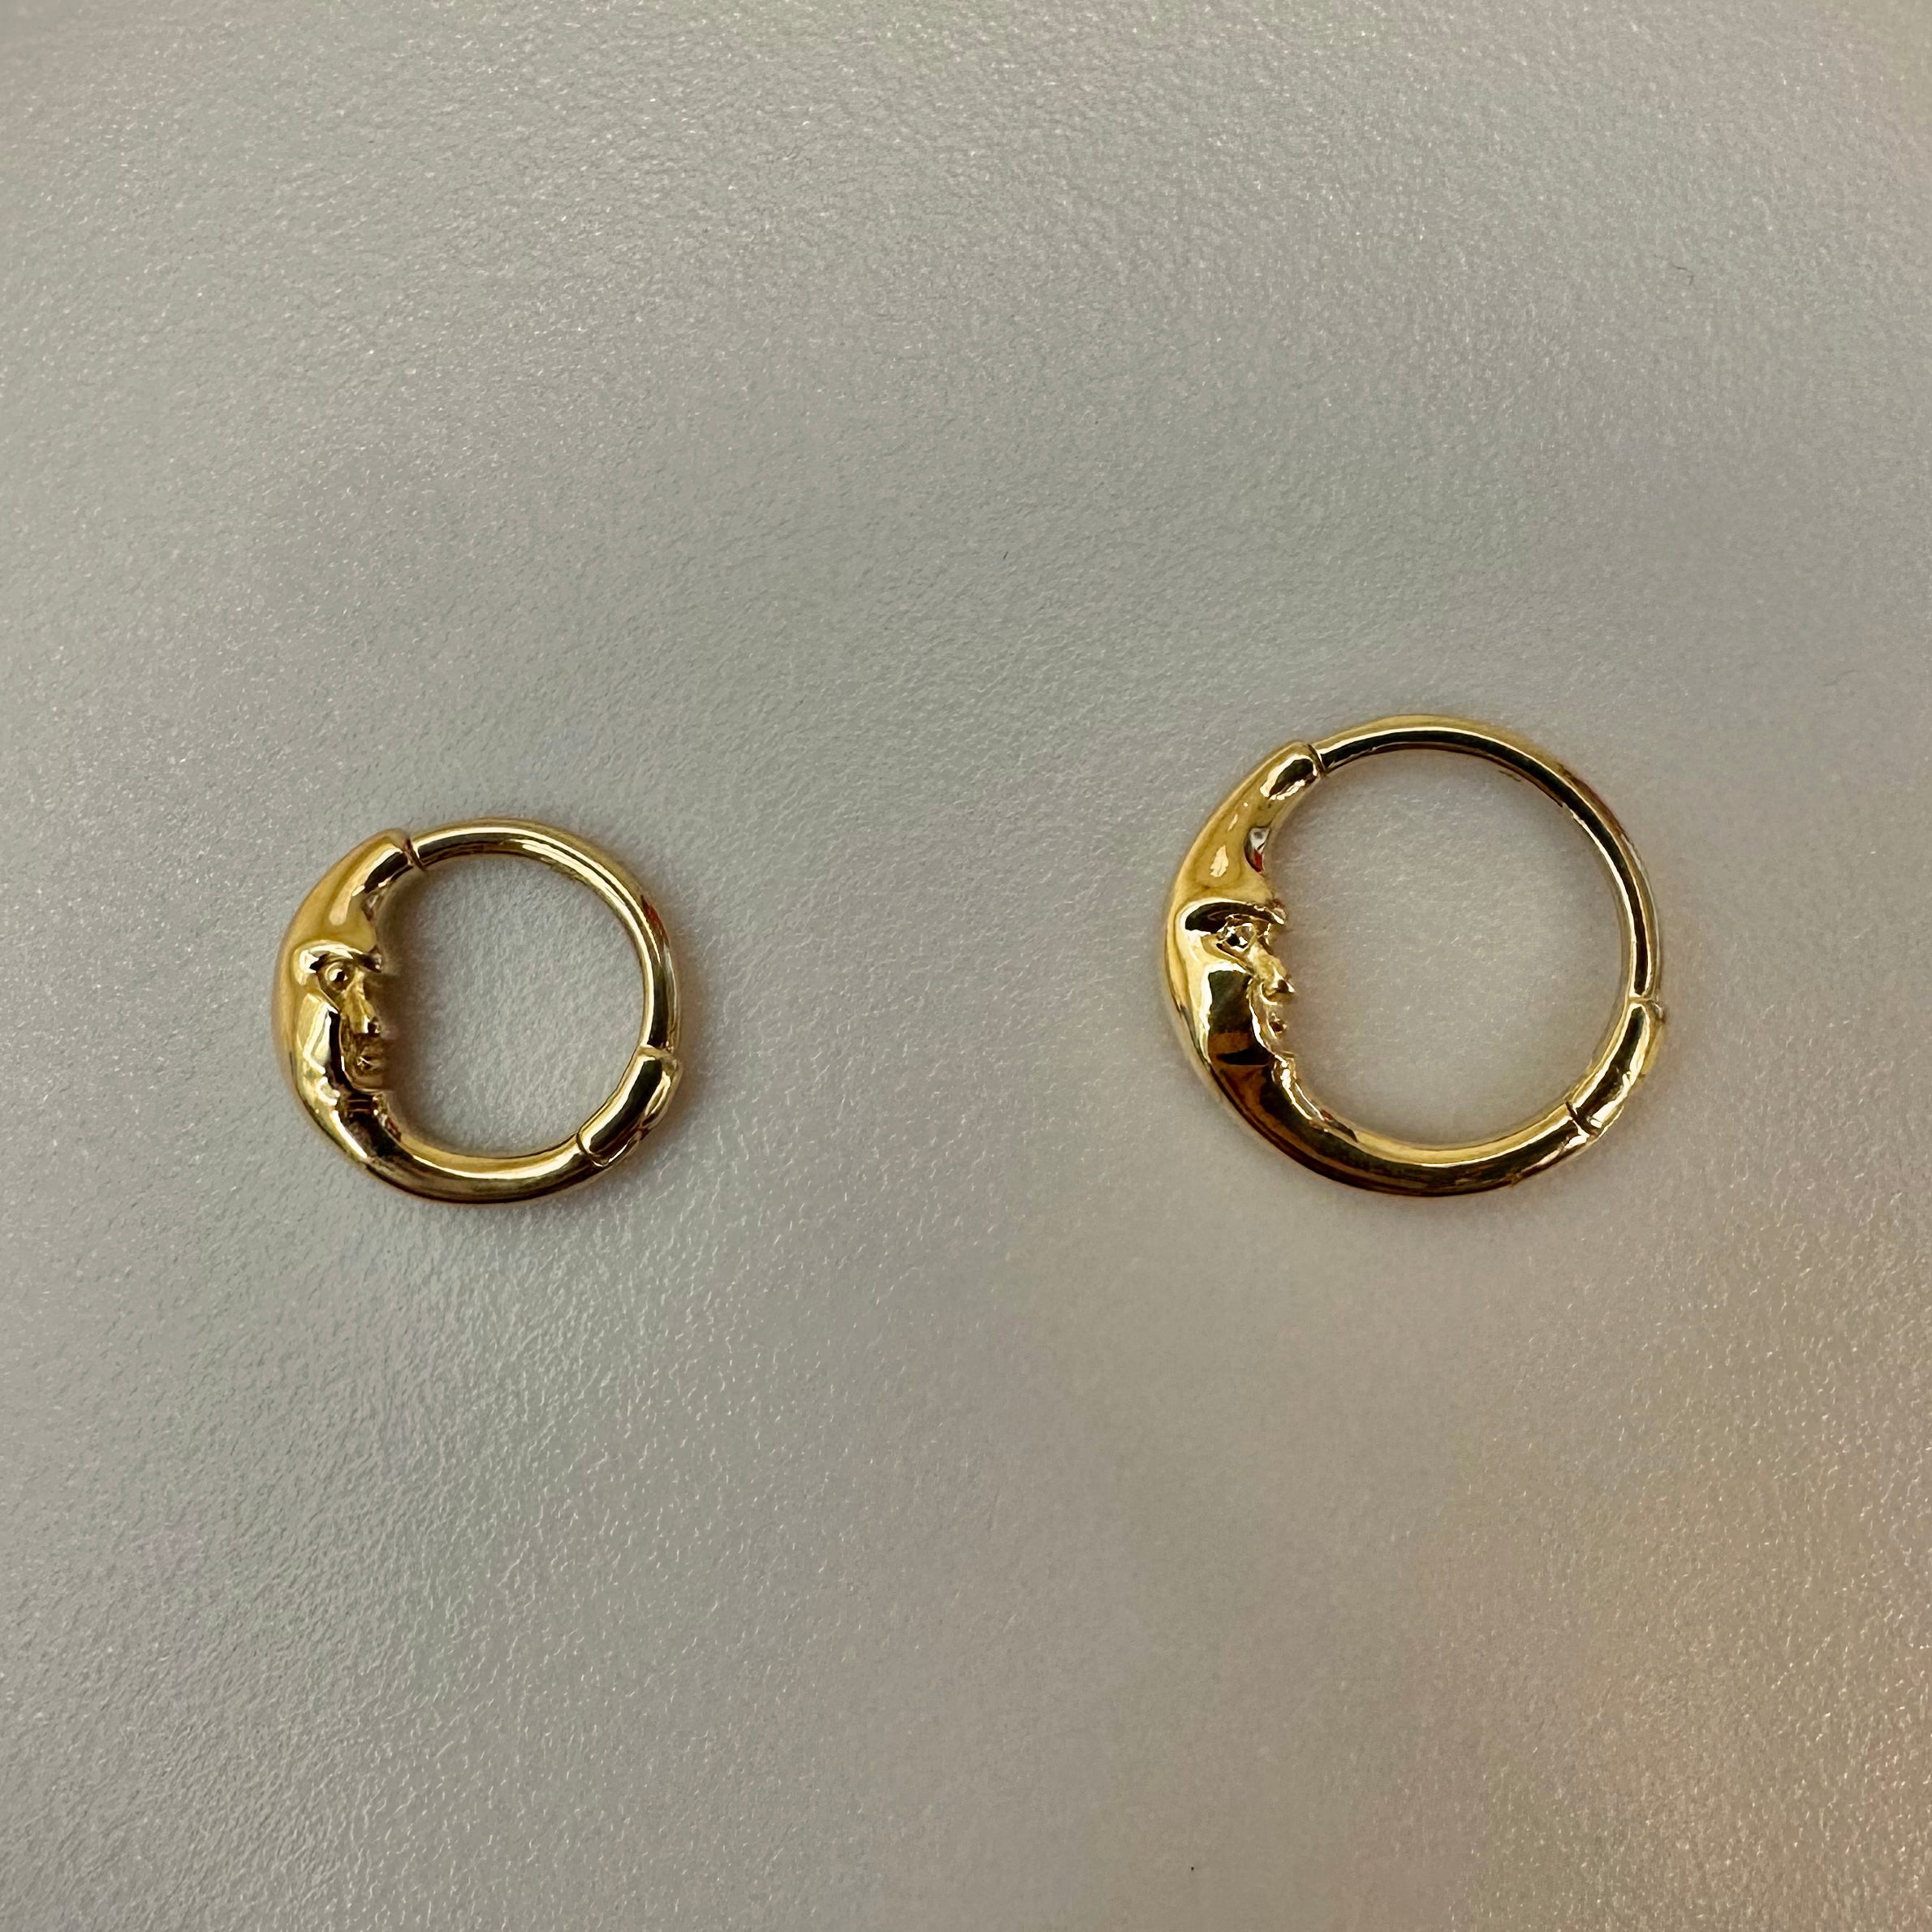 14K Solid Gold Crescent Moon Face Hoop Piercing (Daith & Septum) - Anygolds 